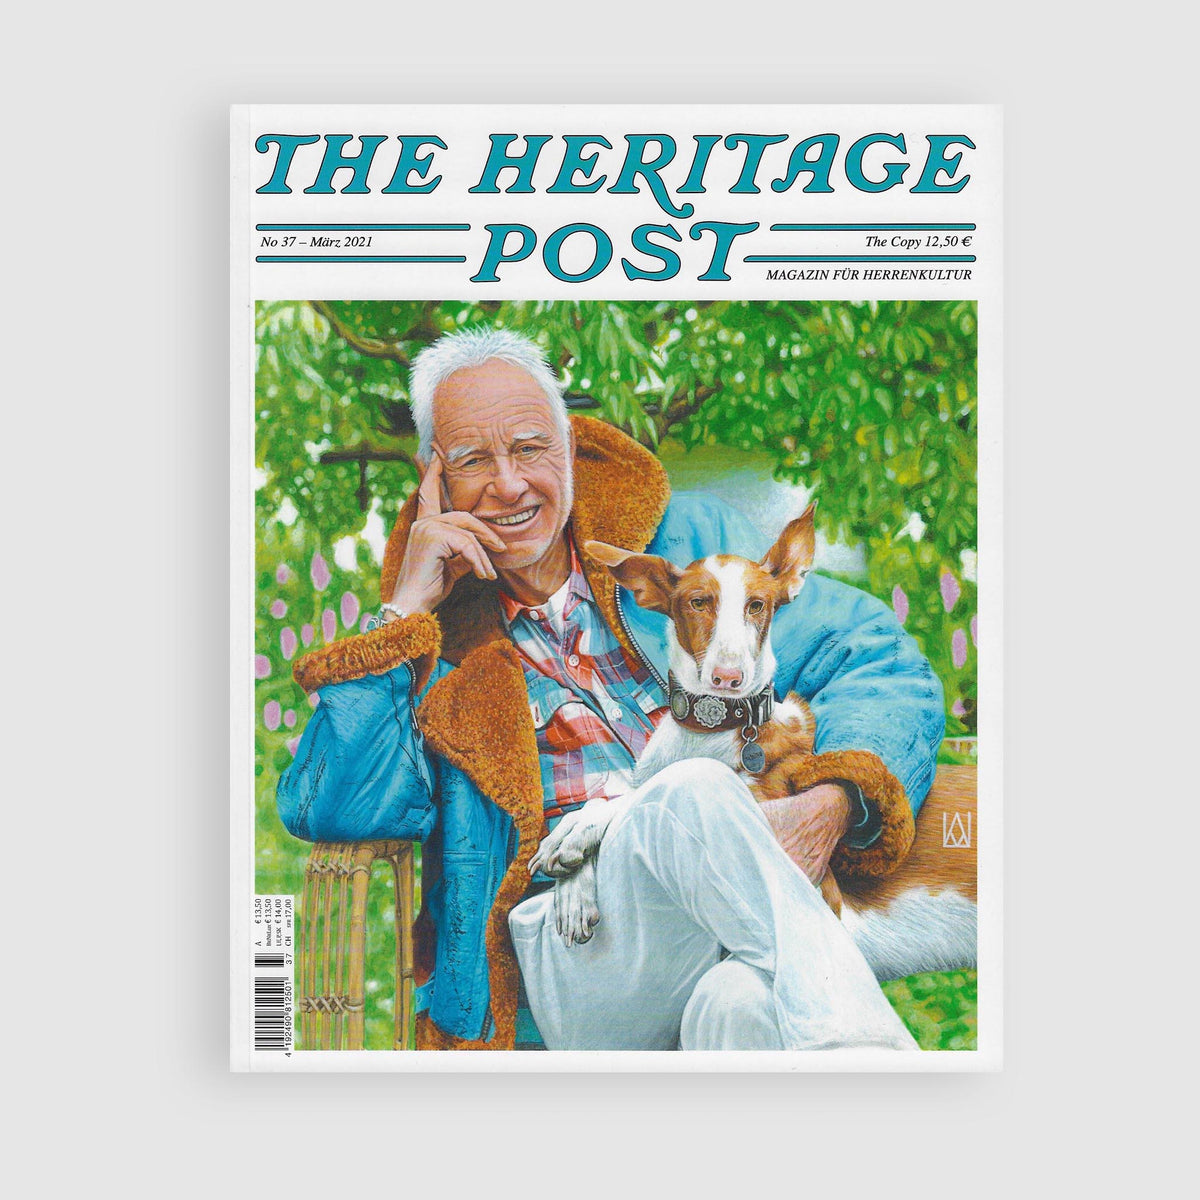 The Heritage Post No. 37